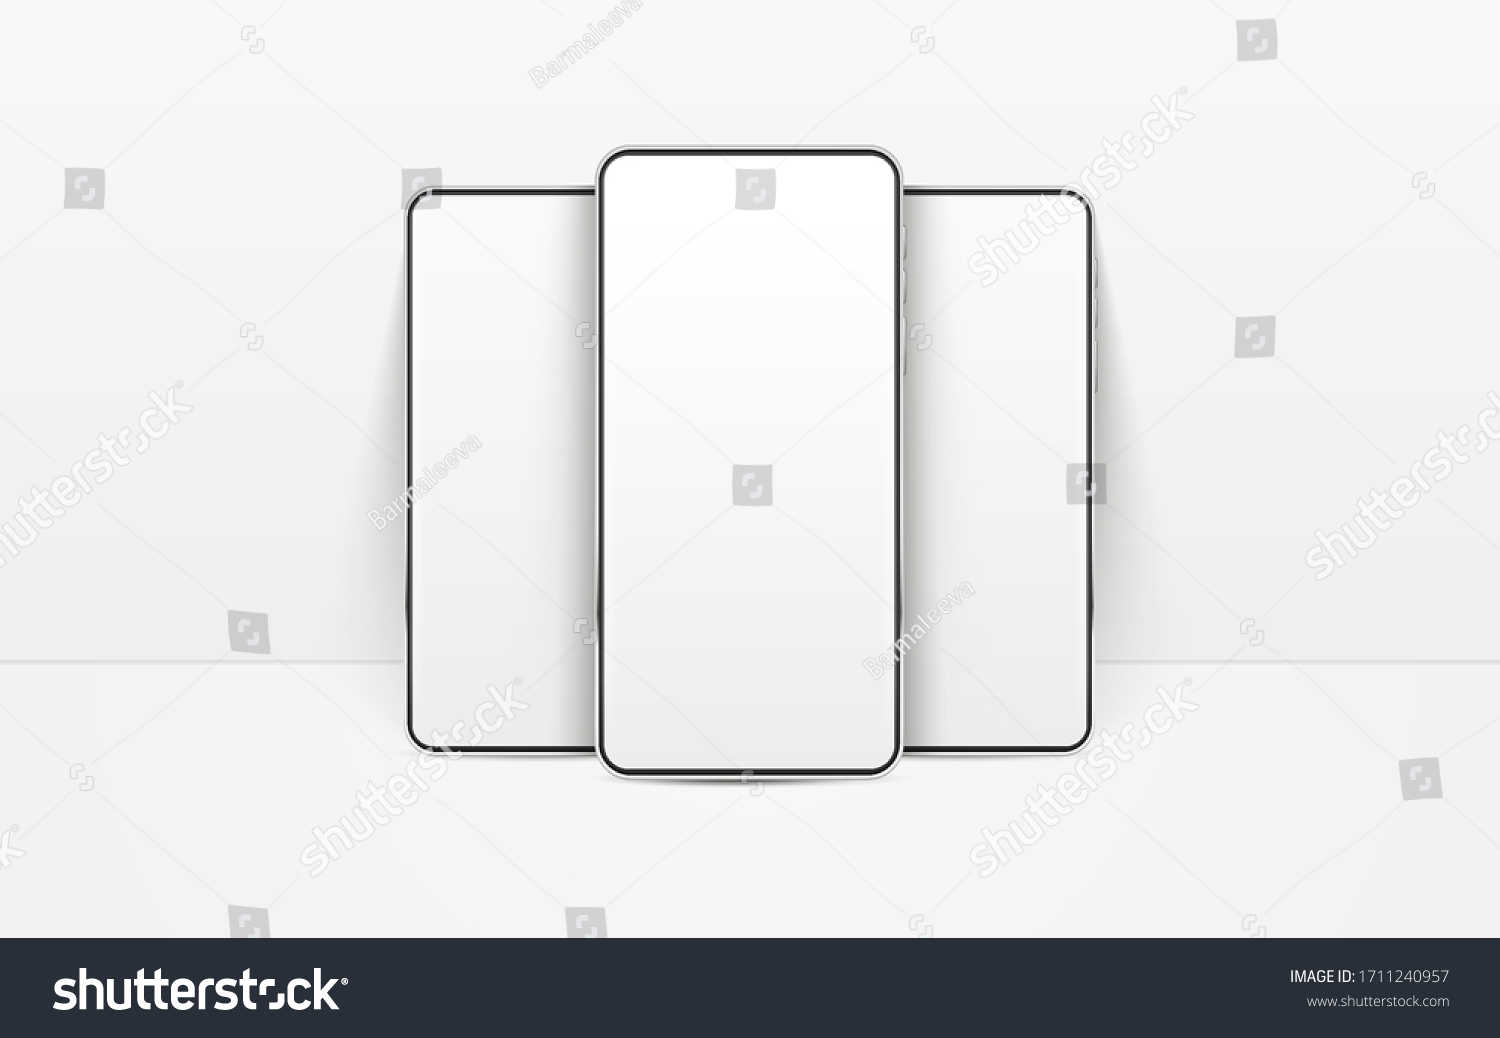 White realistic smartphones vector mockup. 3d mobile phones with blank white screen. Modern cell phones template on white background. Illustration of device 3d screen #1711240957